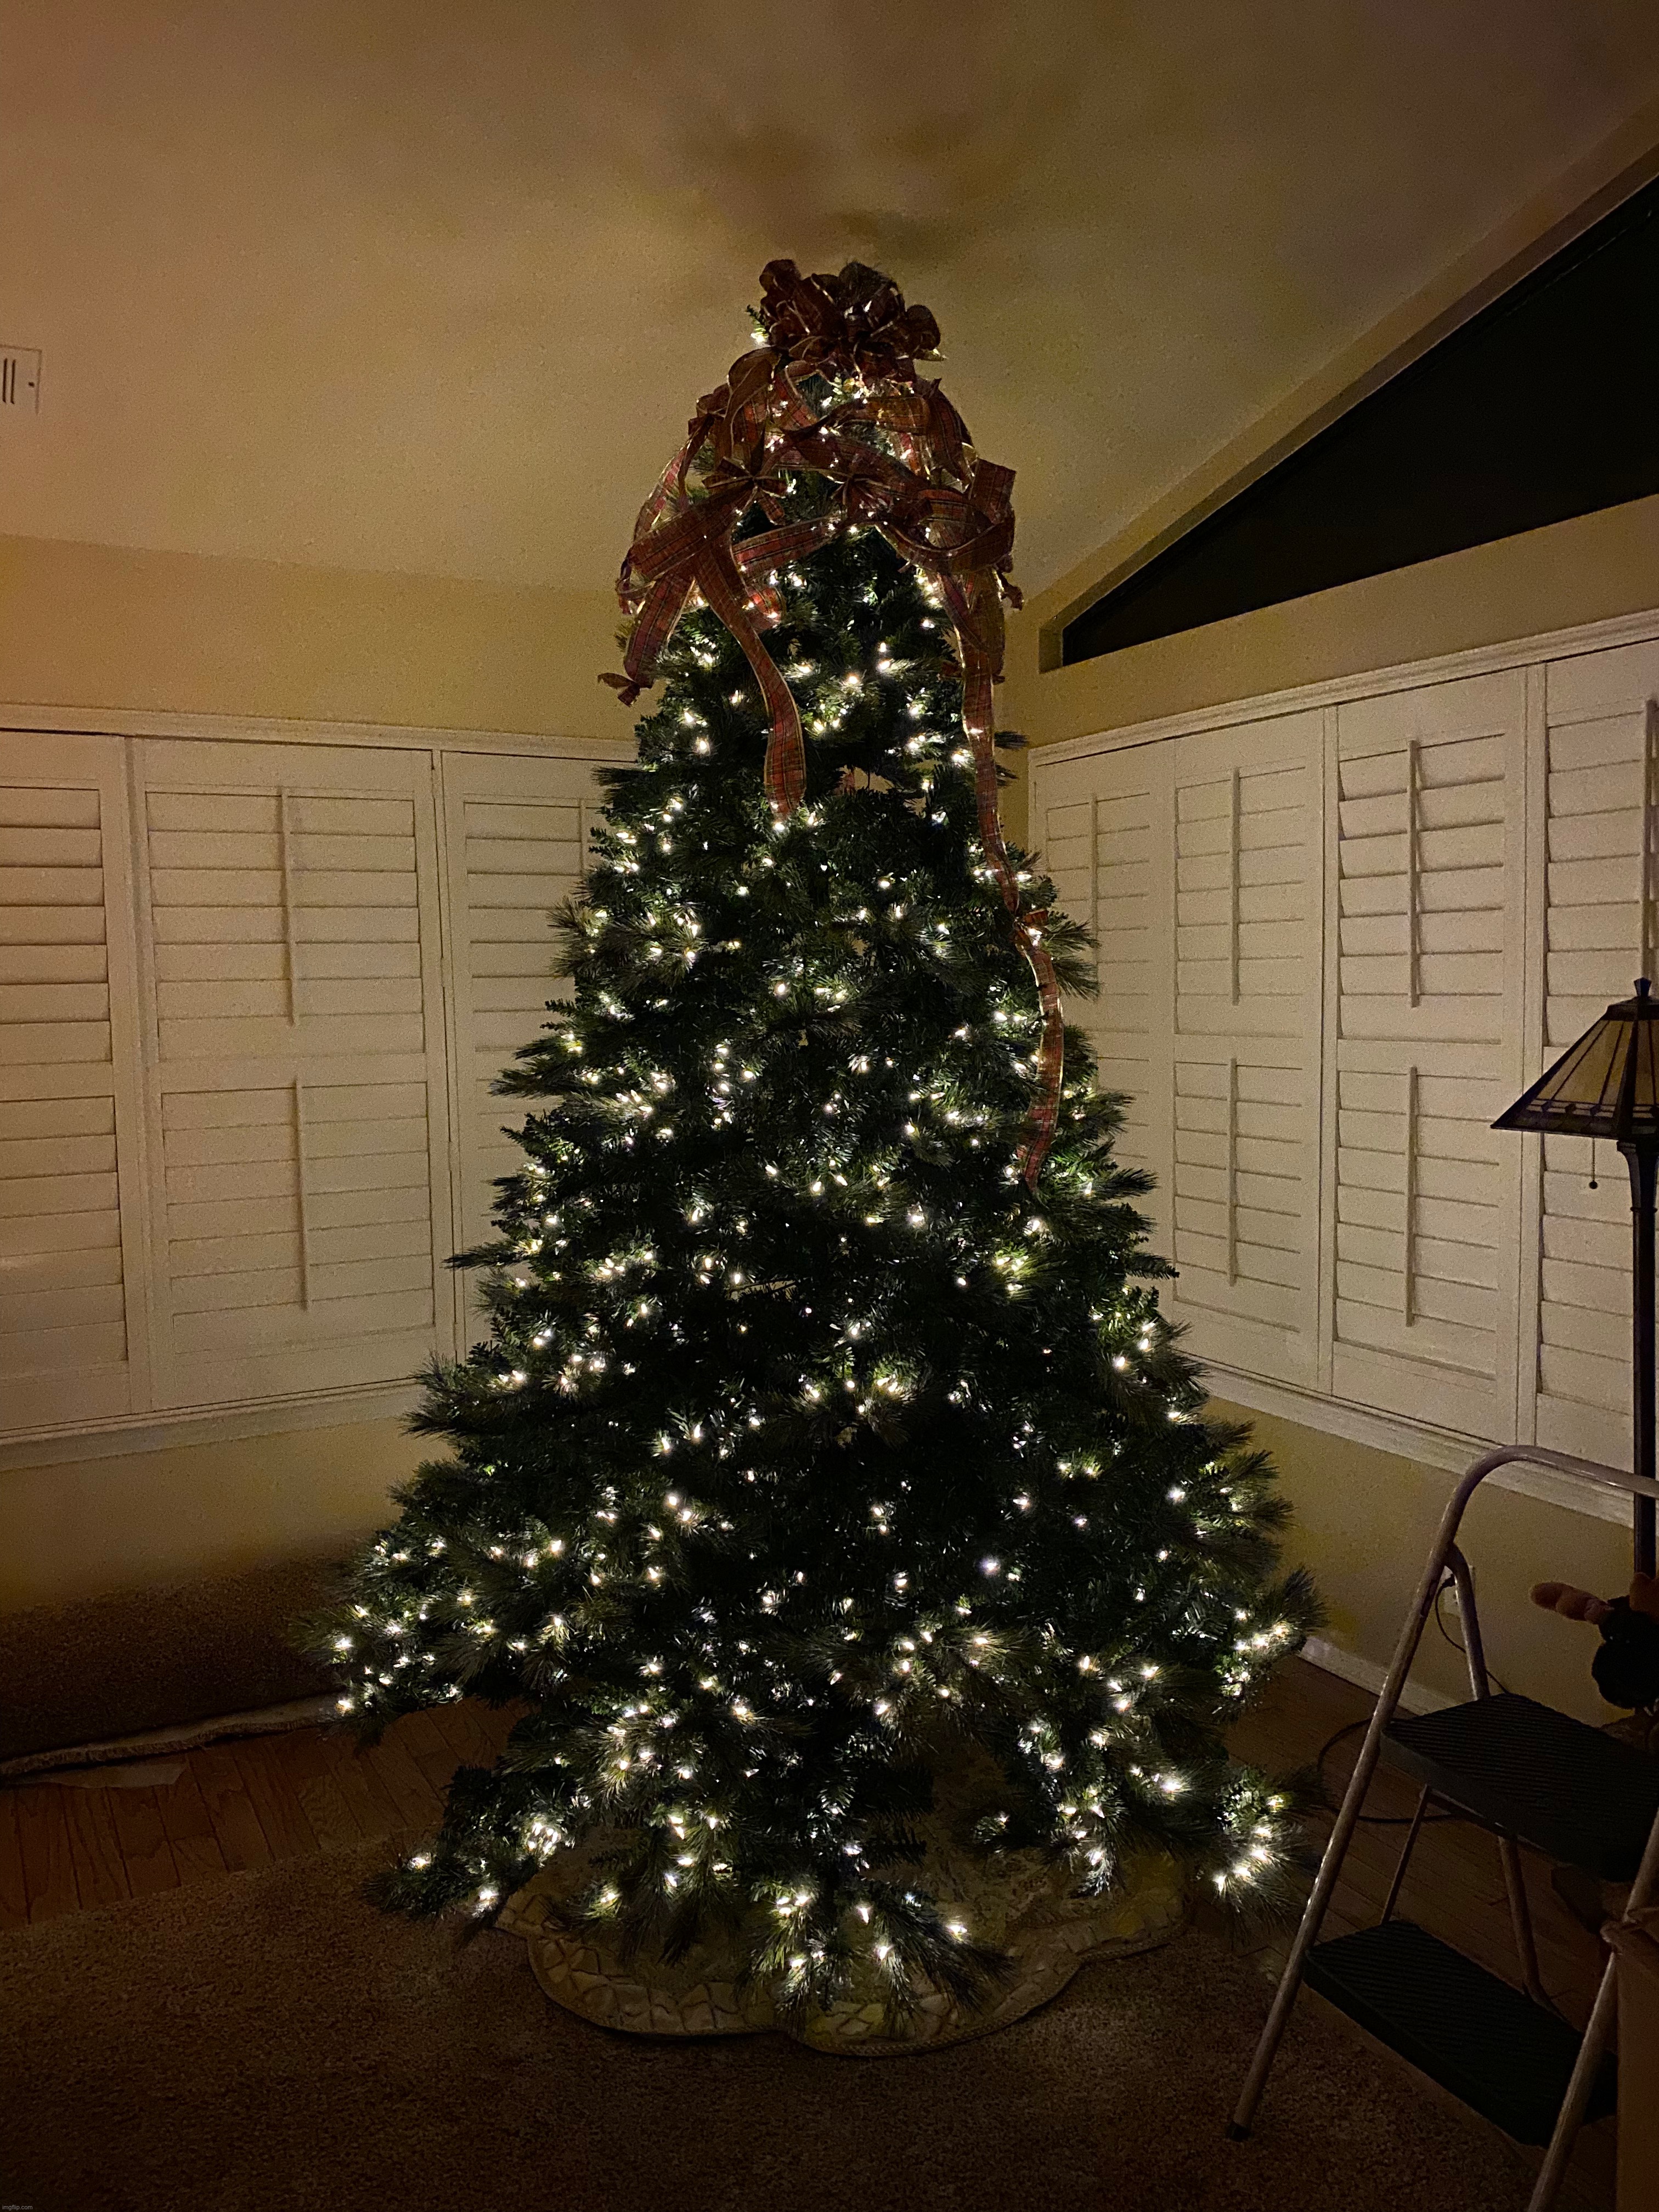 my Christmas tree | image tagged in picture,christmas,christmas tree,still have to decorate it | made w/ Imgflip meme maker